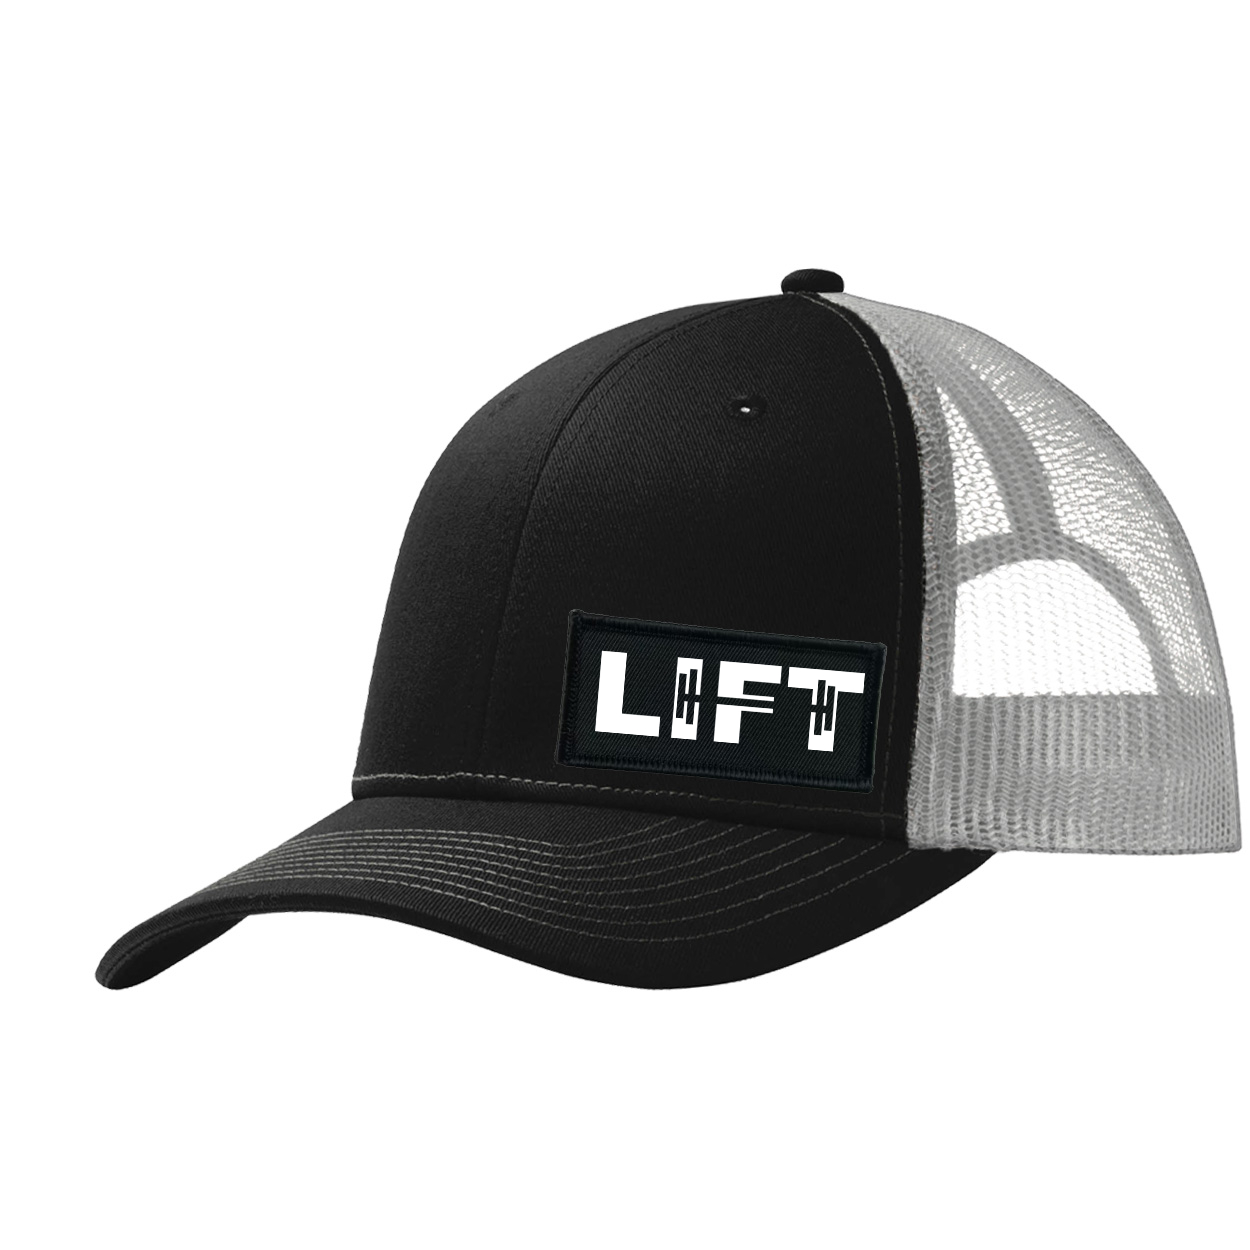 Lift Barbell Logo Night Out Woven Patch Snapback Trucker Hat Black/Gray